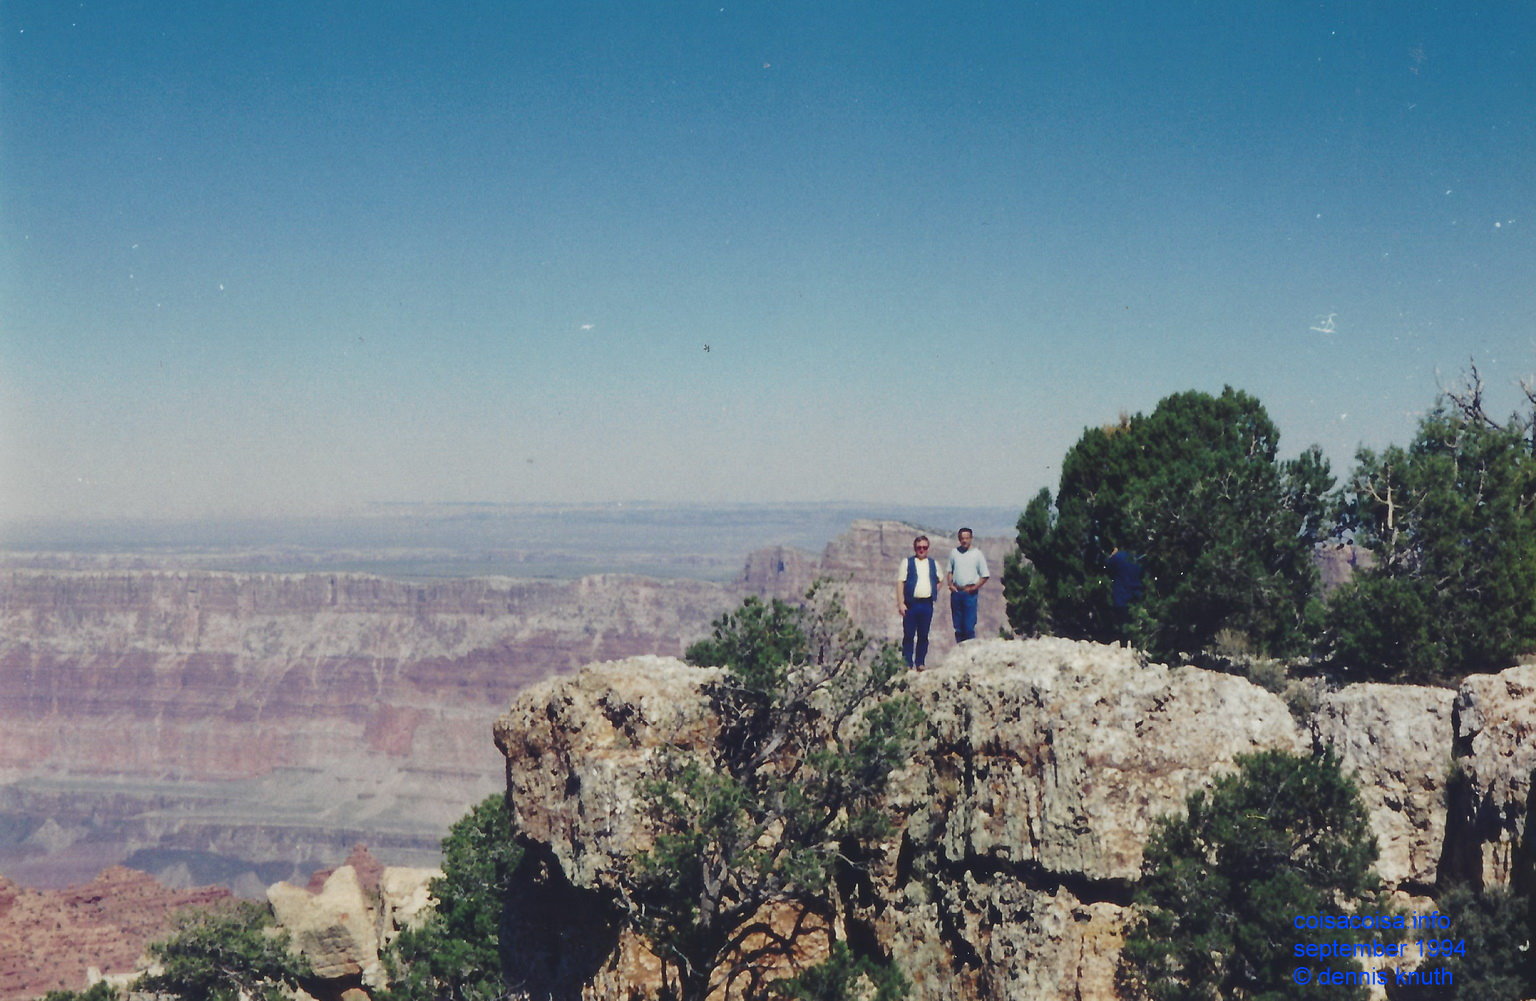 Dennis and Tom out on a precipice at the Grand Canyon